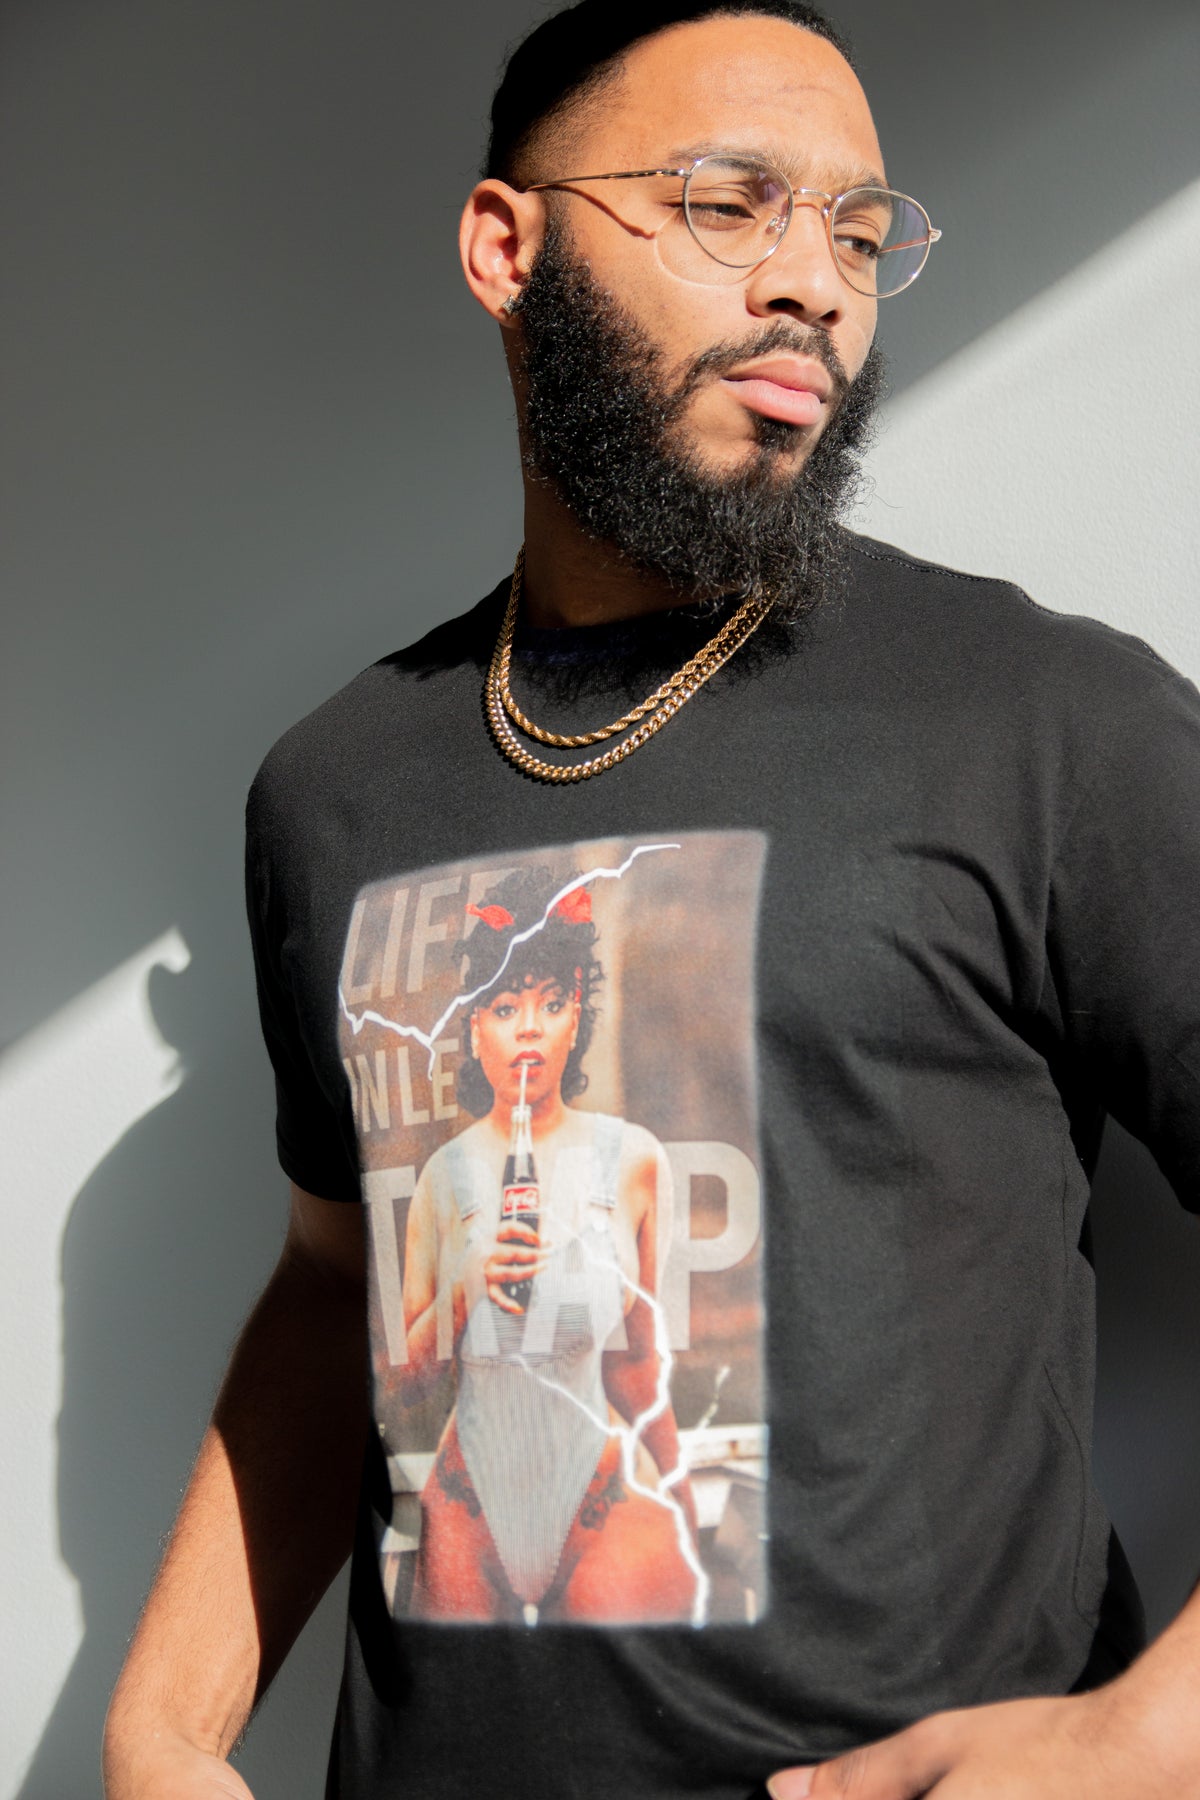 RESTOCKED! “Life In Le Trap” T-Shirt